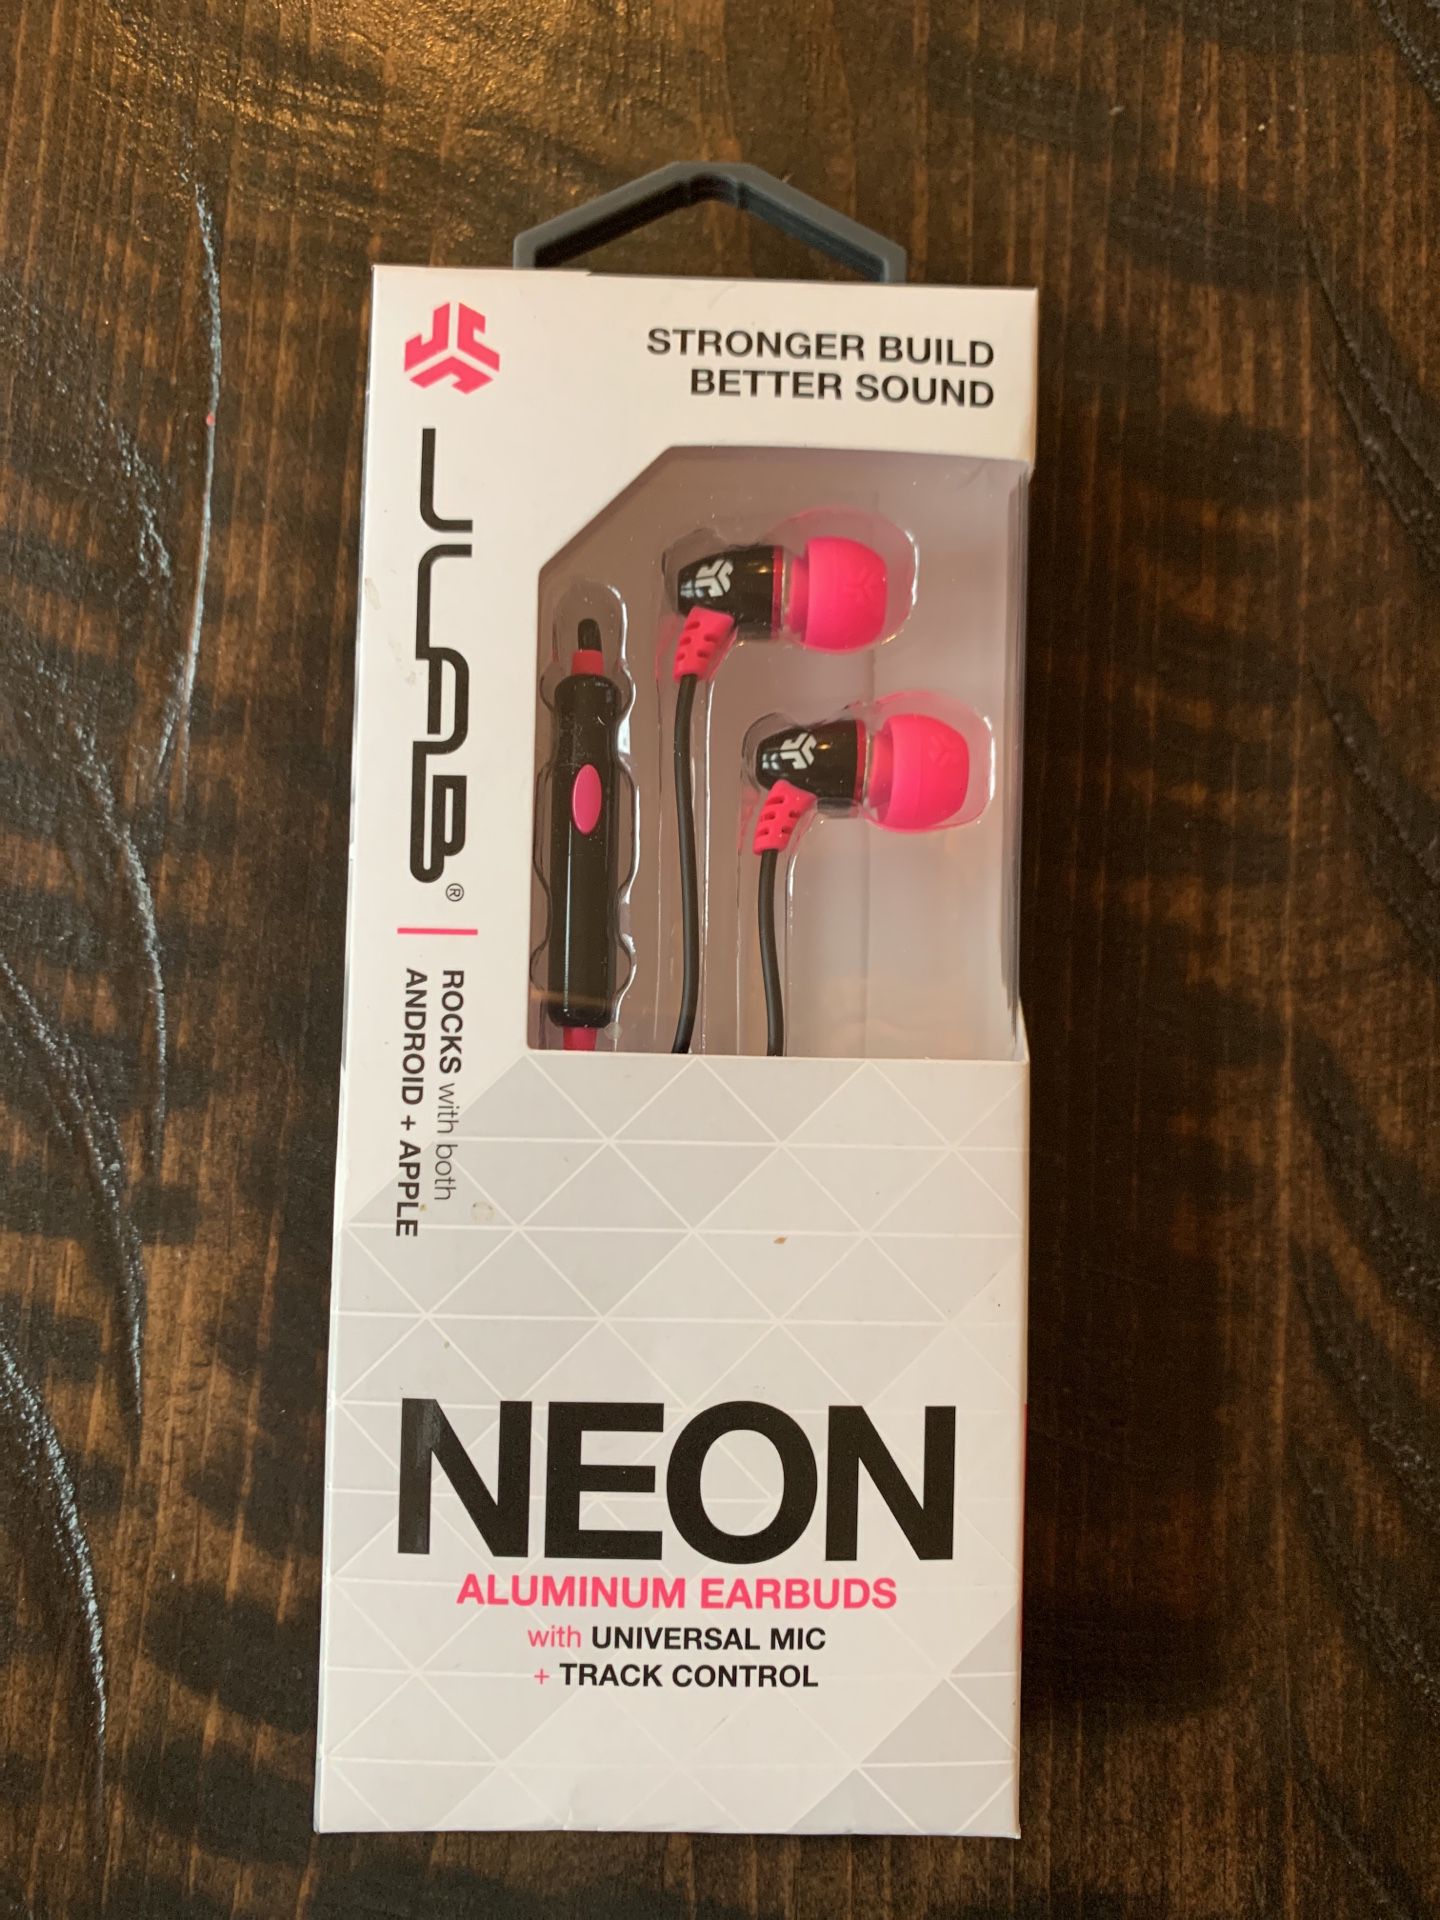 NEW IN BOX JLAB Neon earbuds